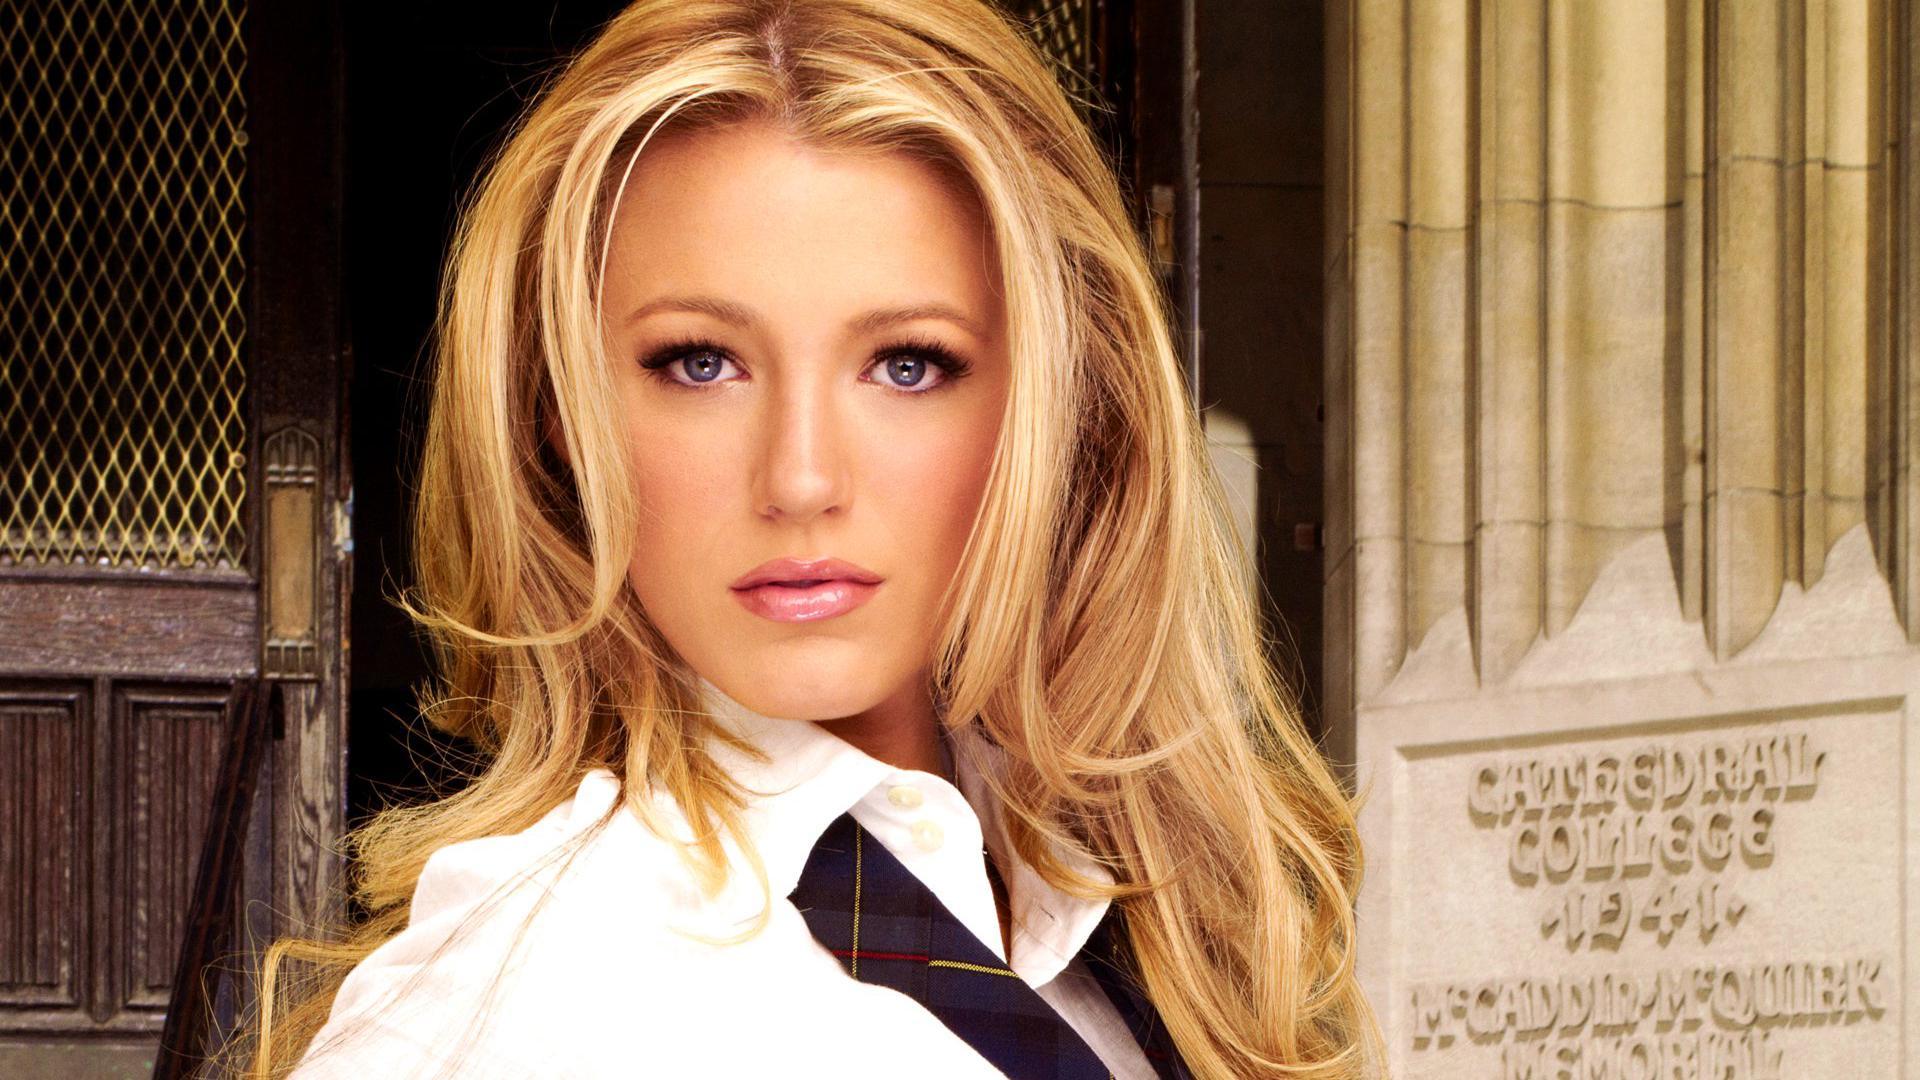 Blake Lively to Star In The Rhythm Section From Bond Makers